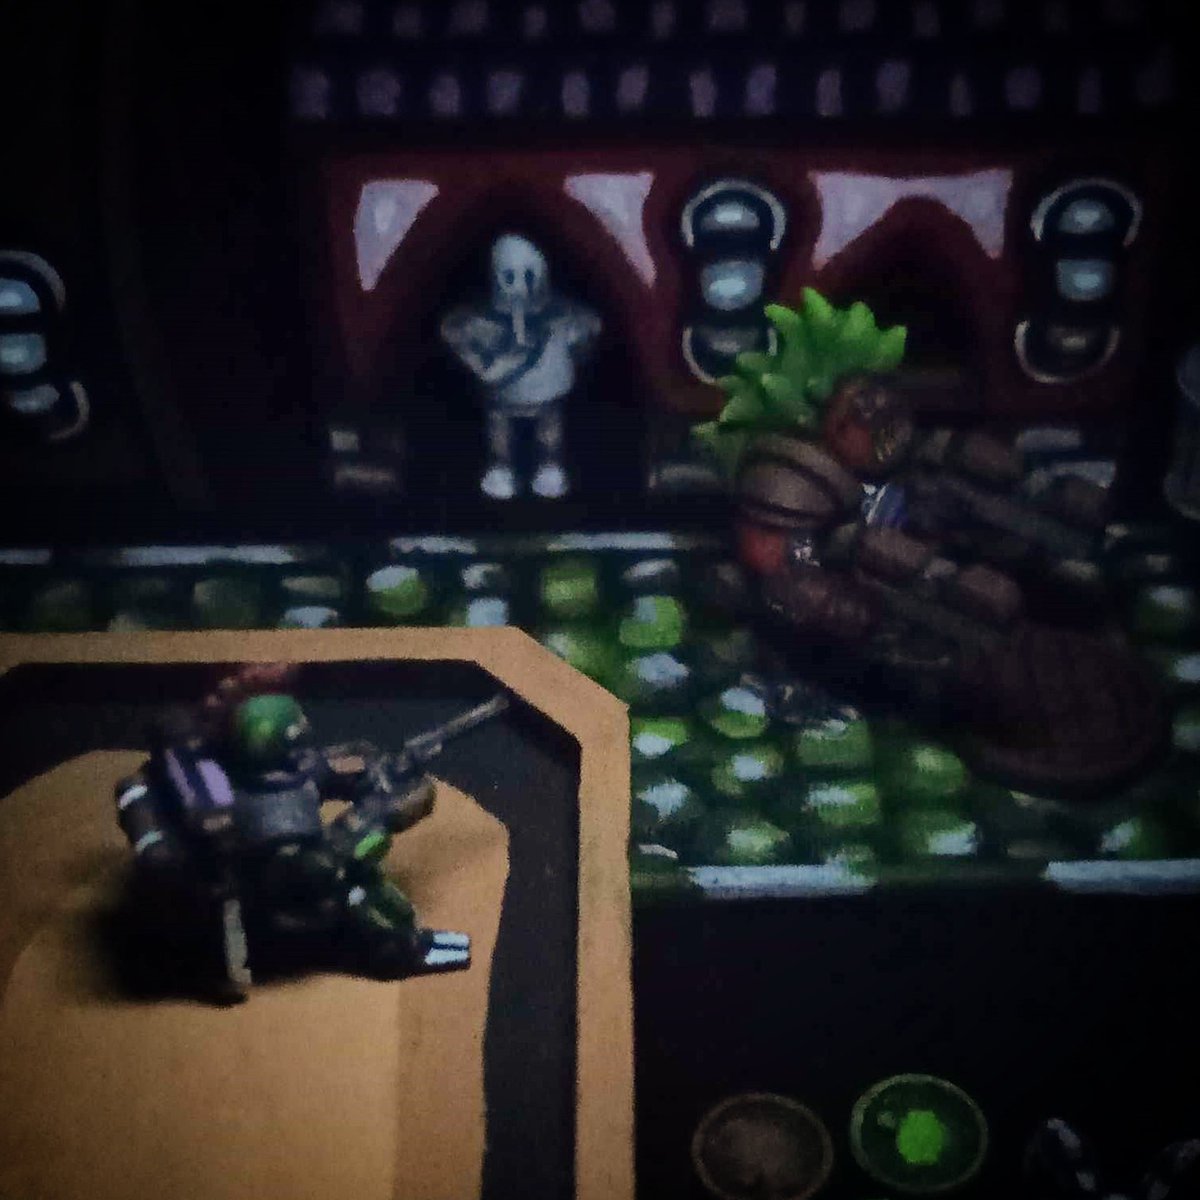 Not today...

#forthegoldenegg #ibeliveicanfly #betabots #robot #robots #redmoon #scifi #scifiart #3dprinting #3dprintingideas #3dpainting #diorama #tabletop #tabletopgames #wargame #wargames #wargaming #tabletopminiature #tabletoppainting #minipainting #miniaturepainting #punk